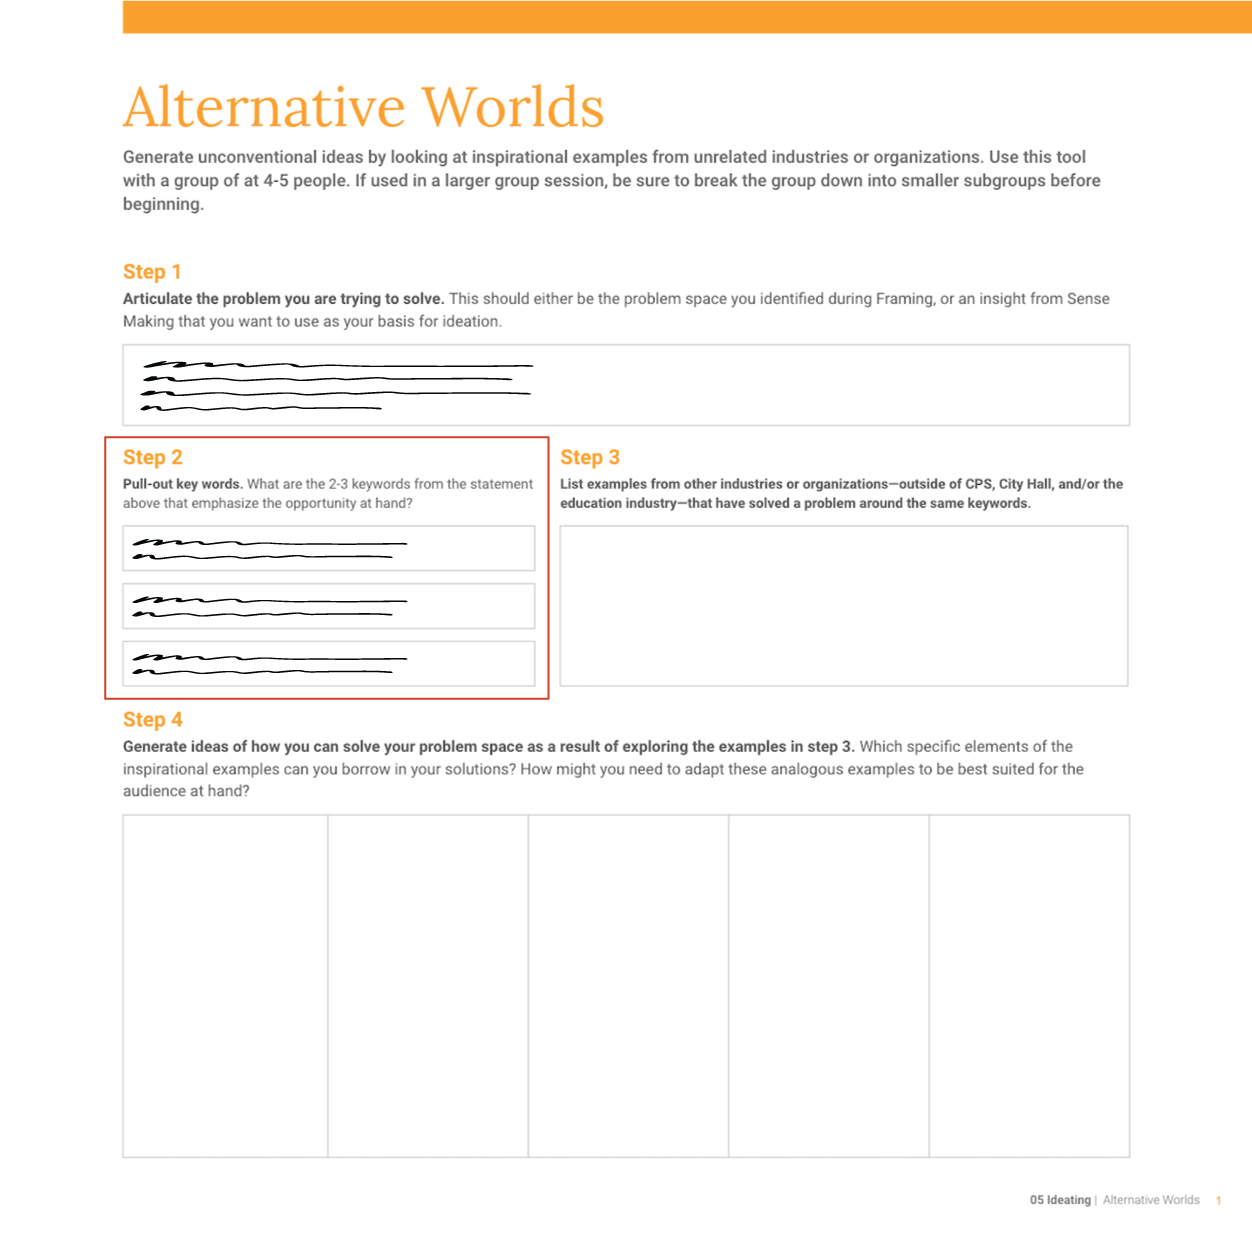 image of Alternative-Worlds worksheet with part 2 filled in